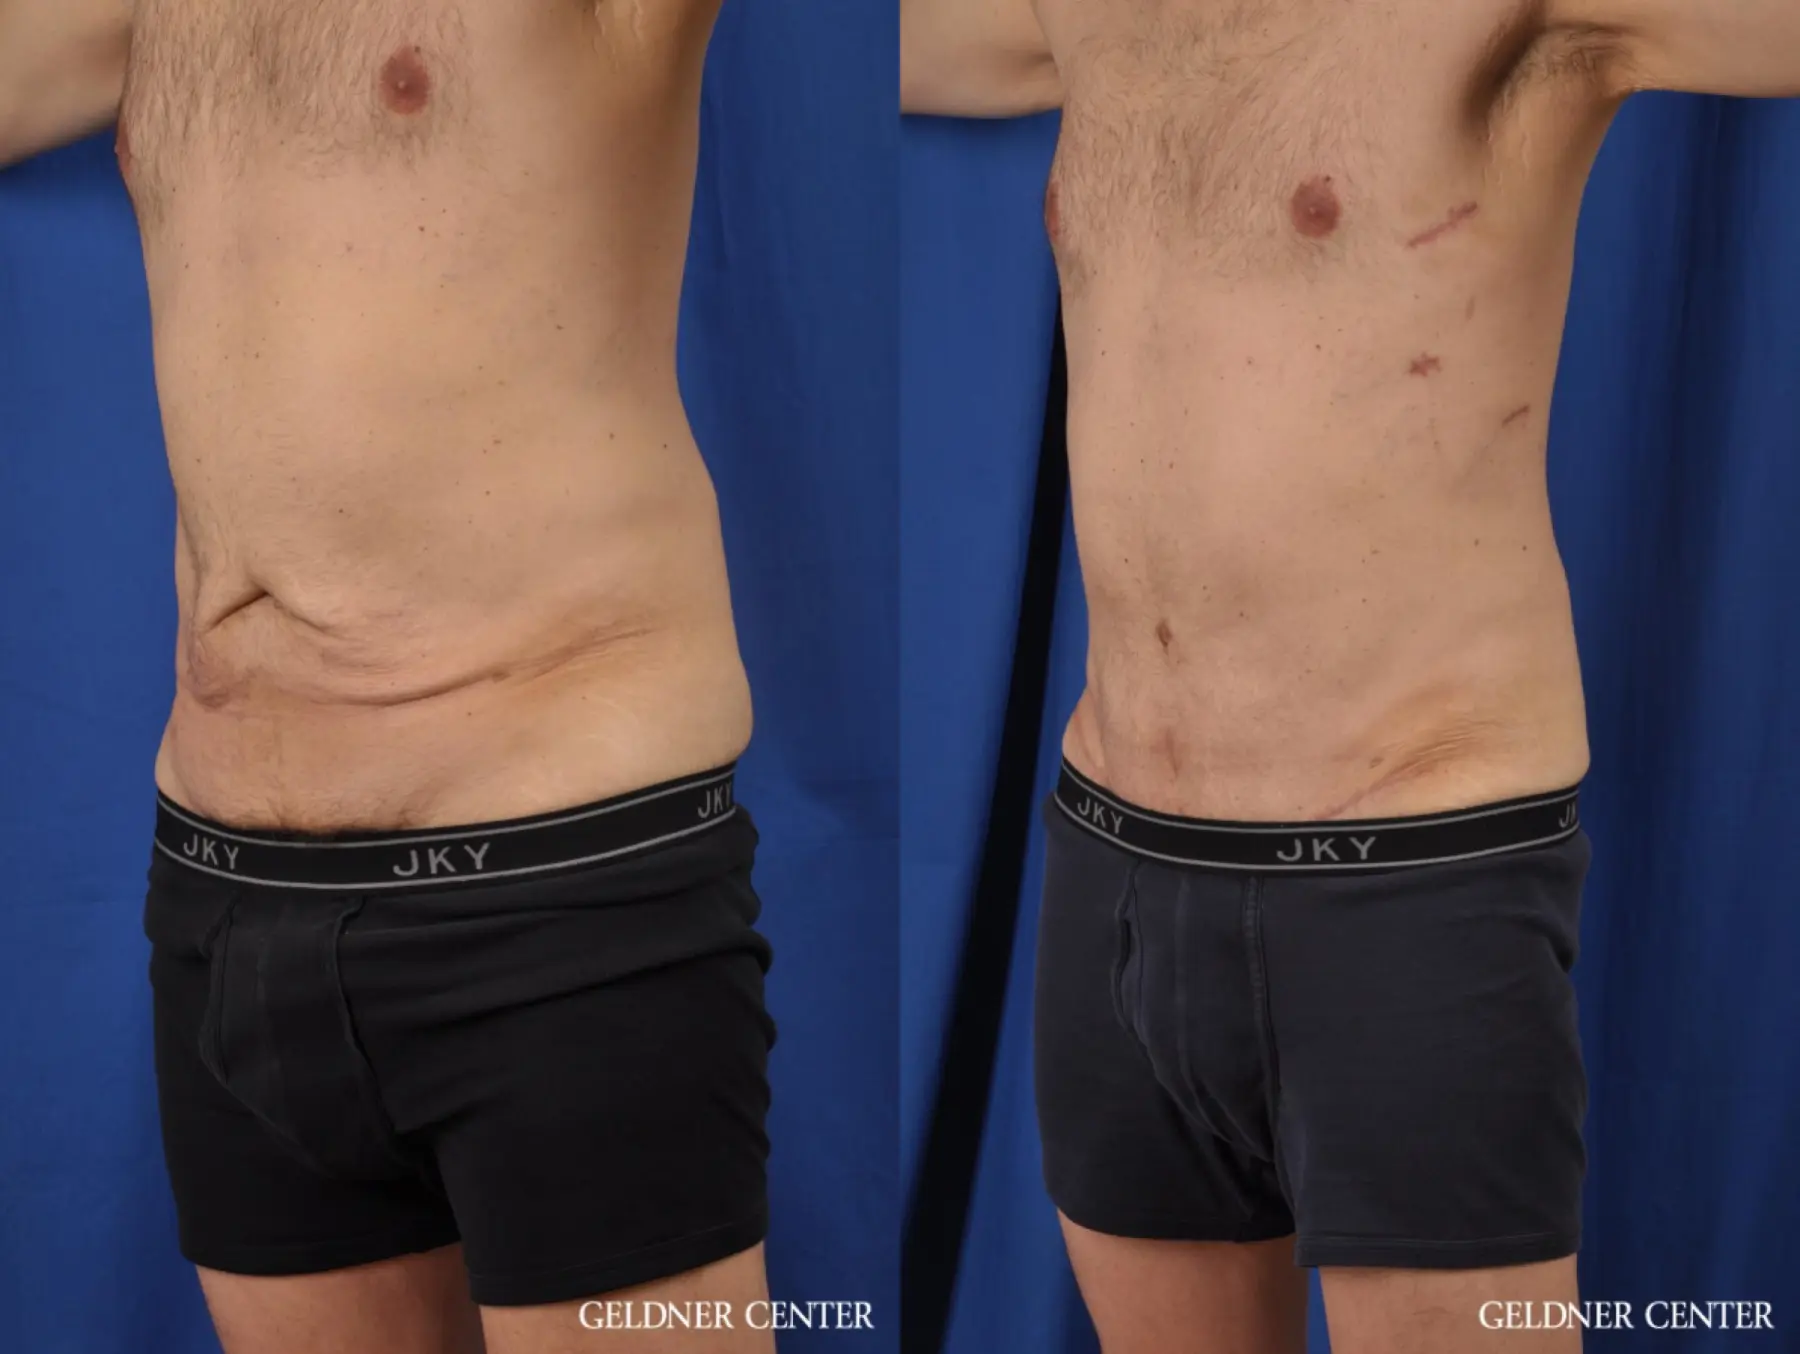 Abdominoplasty For Men: Patient 2 - Before and After 4